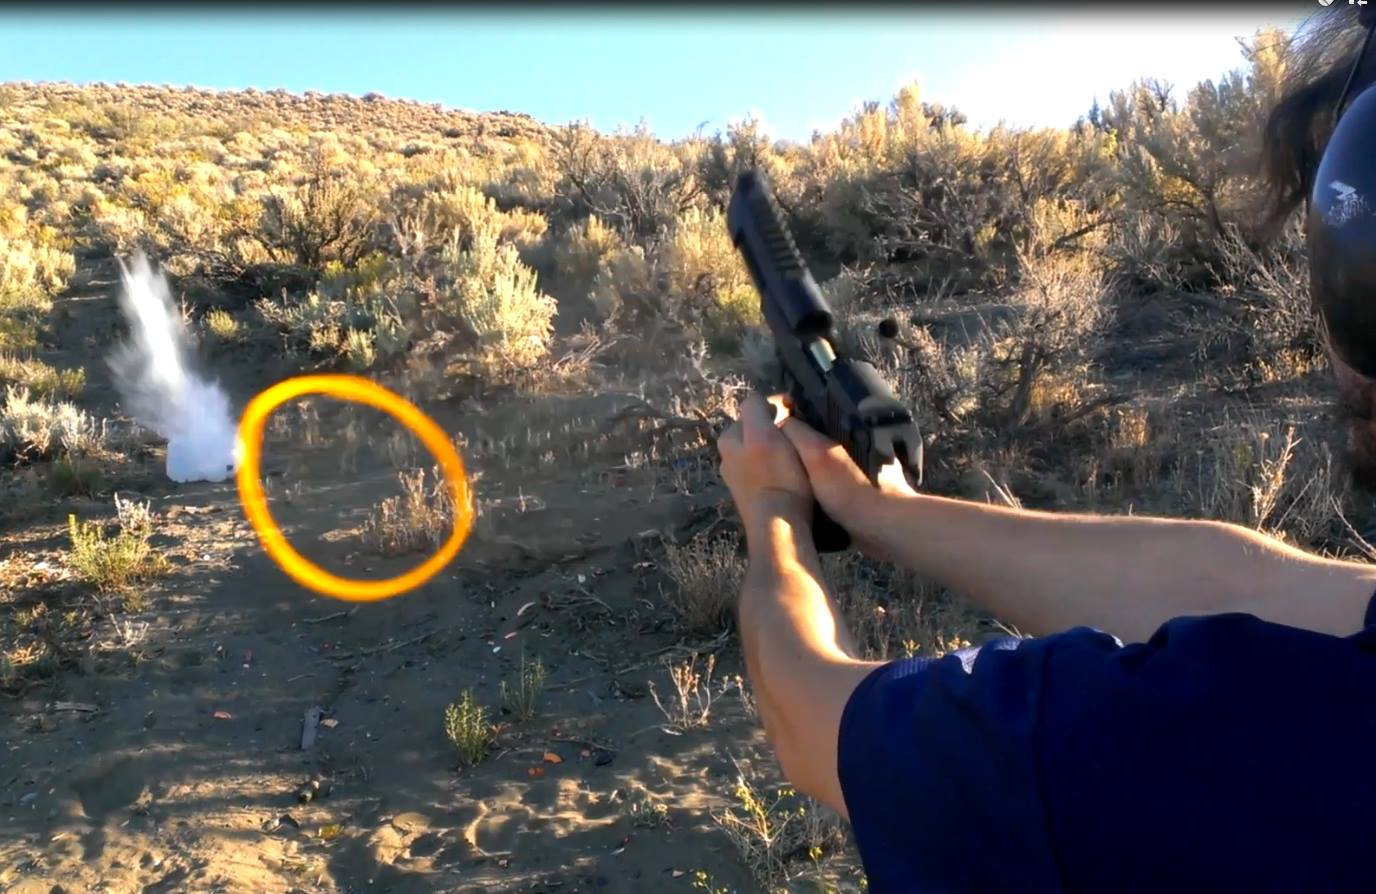 My cousin shooting the Deagle 50